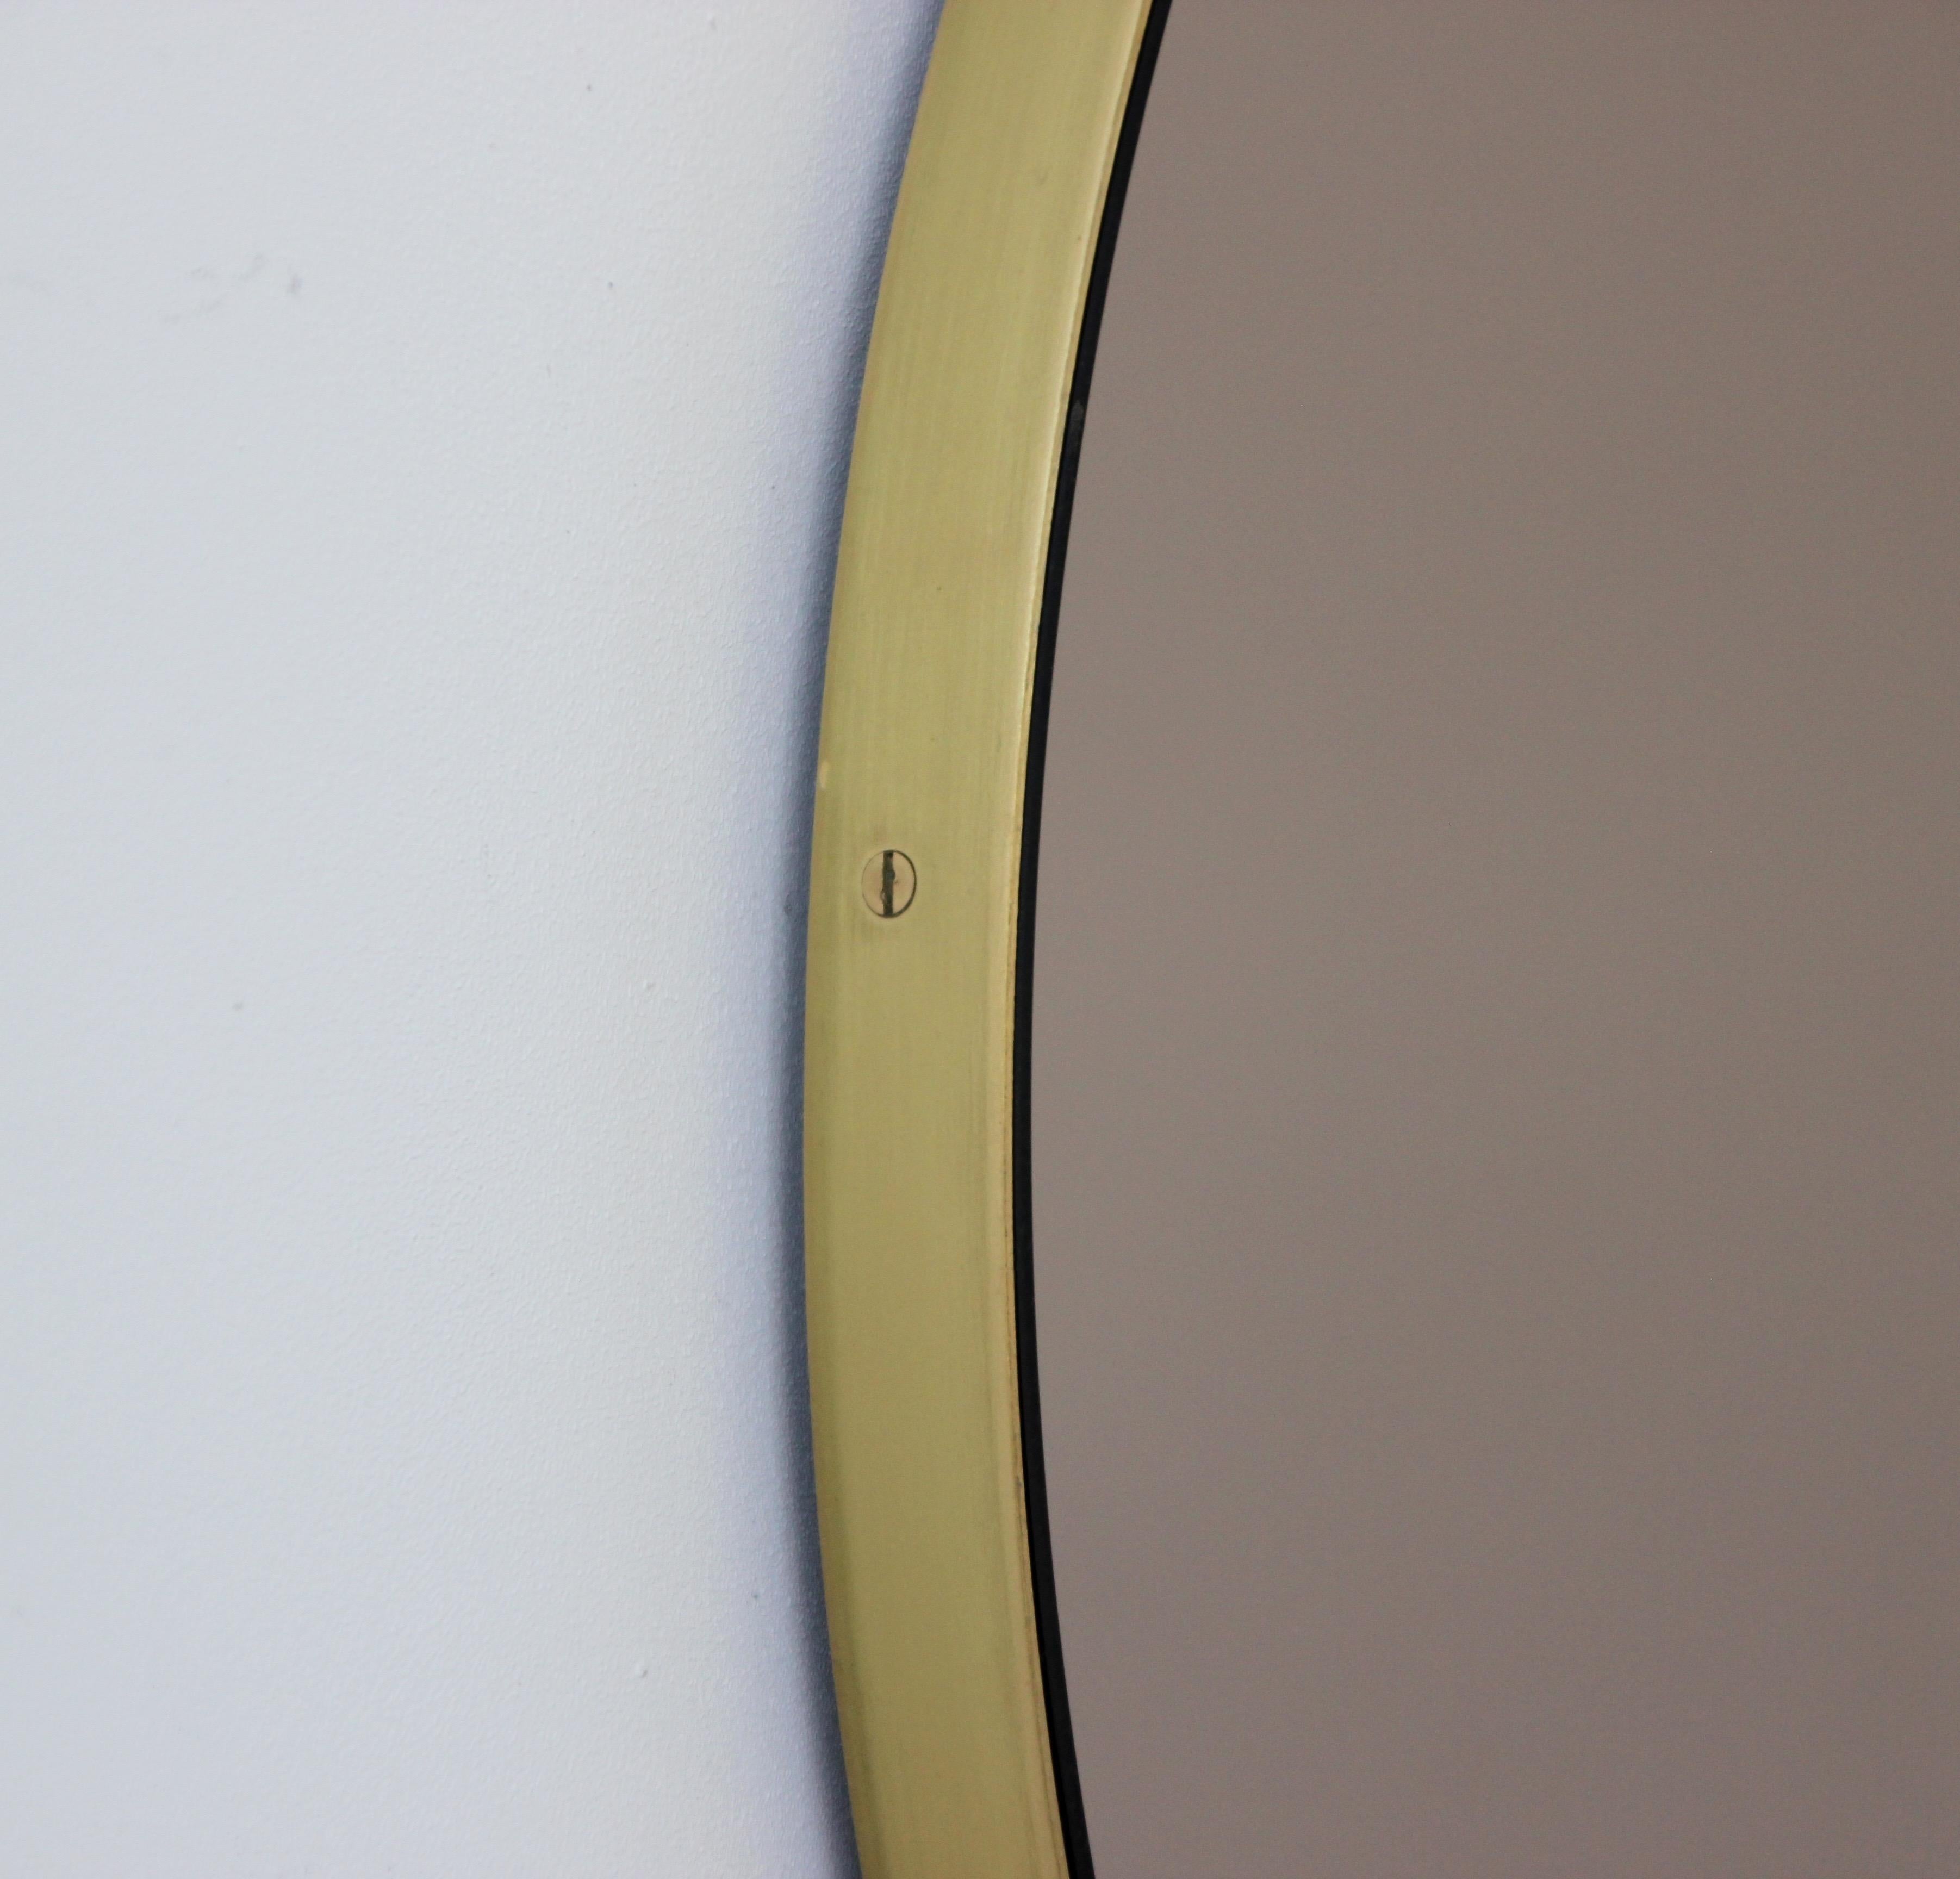 Orbis Bronze Tinted Contemporary Round Mirror, Brass Frame, Medium In New Condition For Sale In London, GB